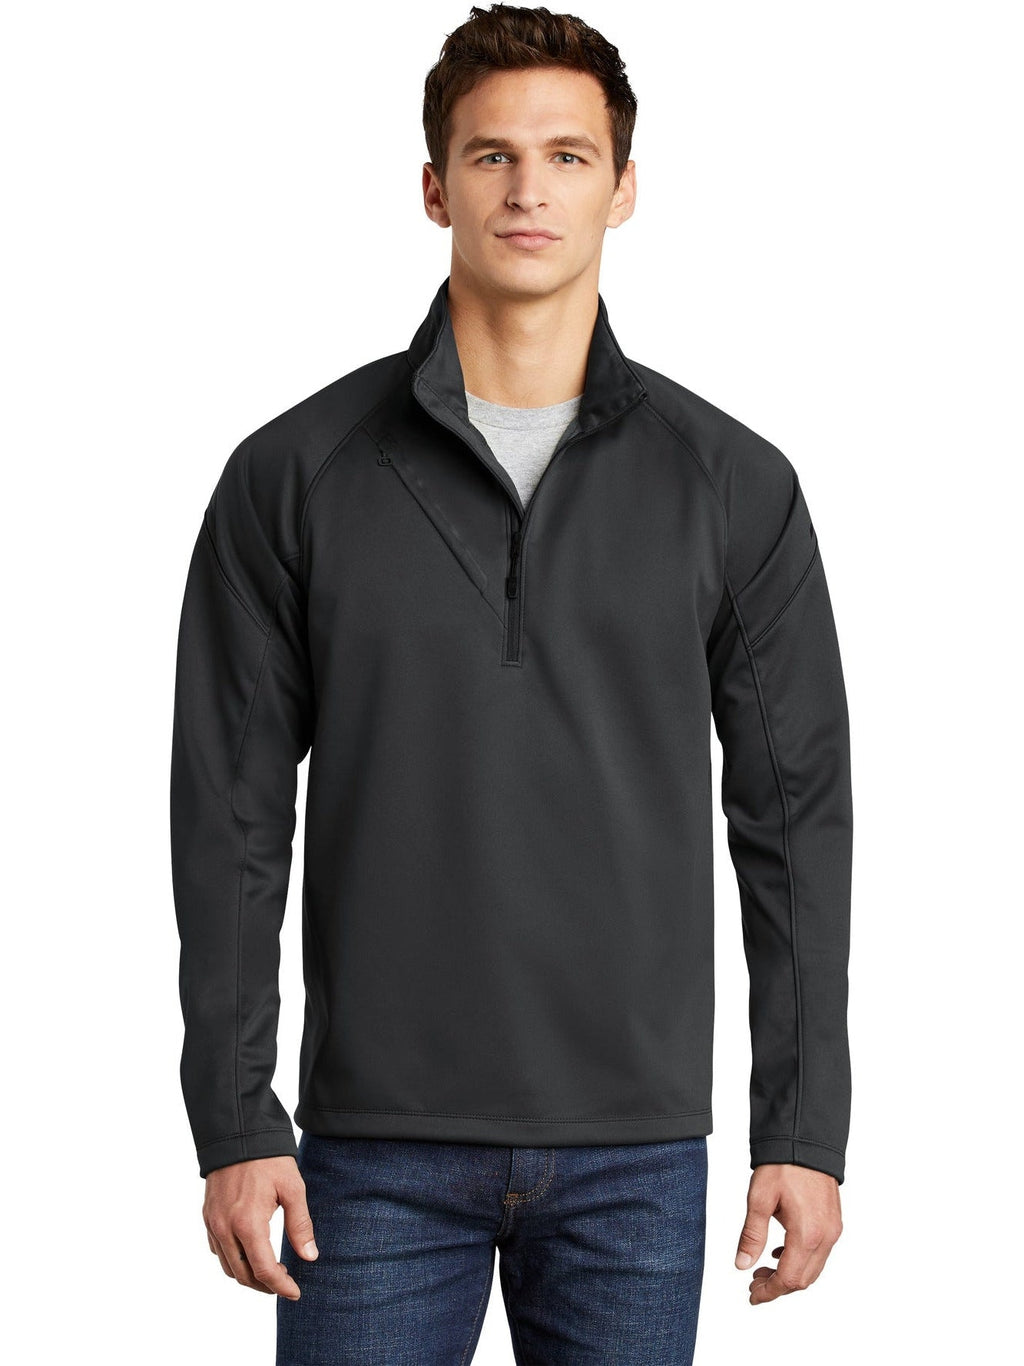 OGIO OG2010 Quarter-Zip Pullover with Custom Embroidery